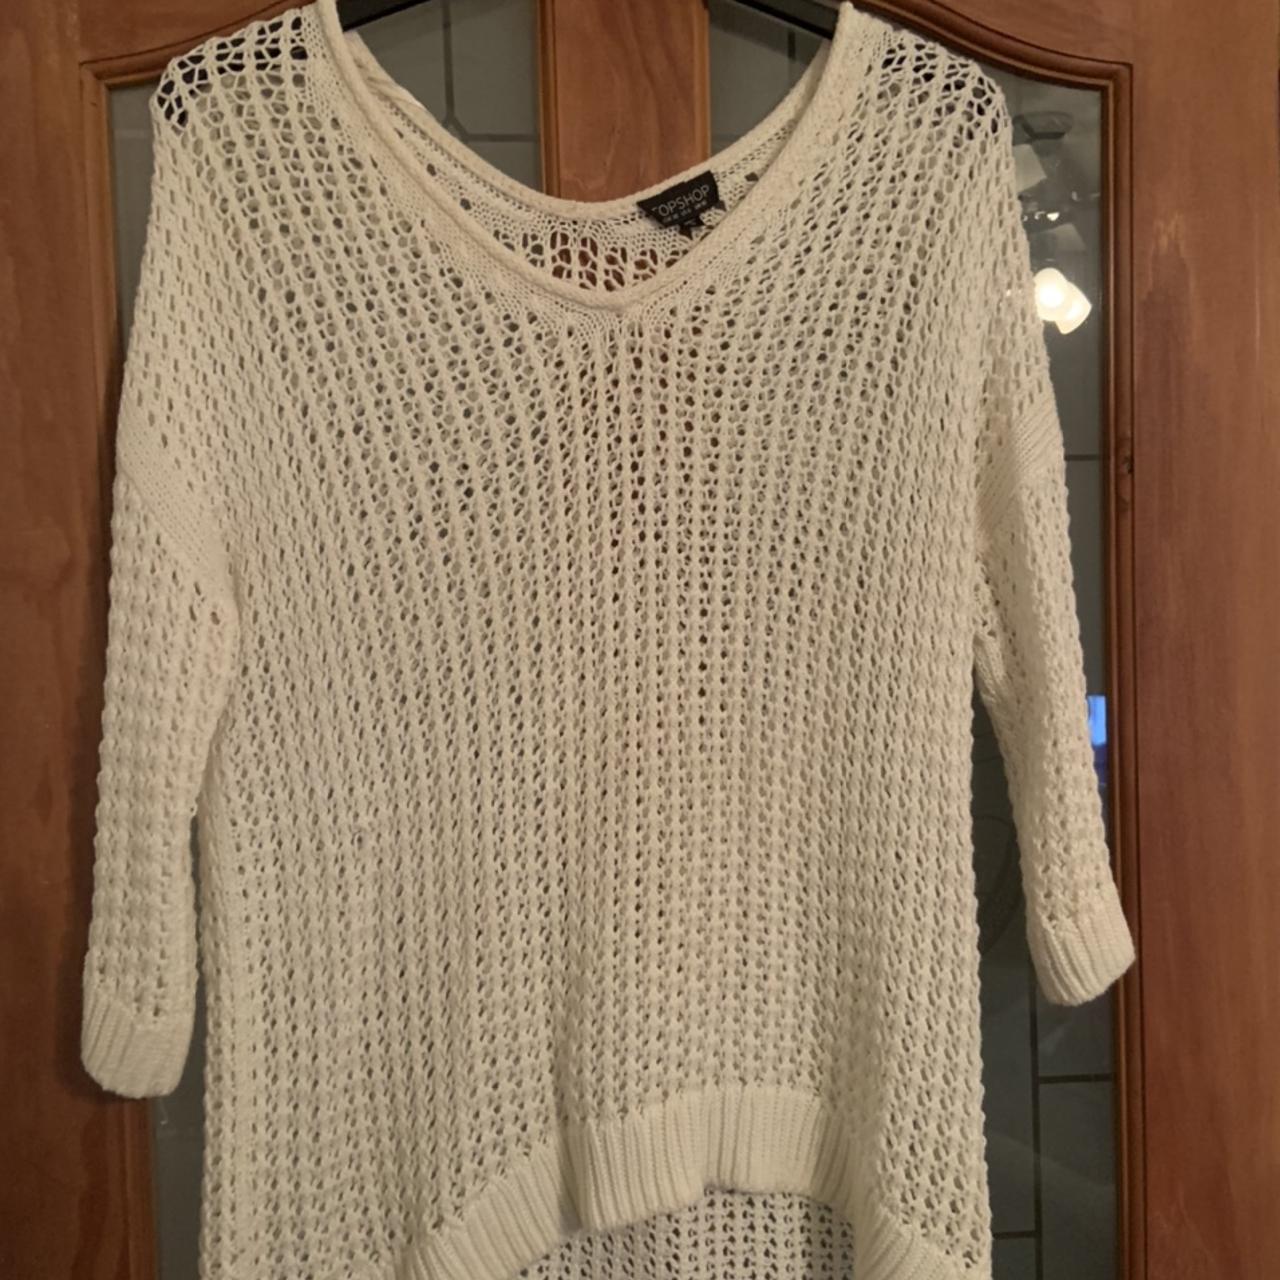 Women’s white knitted top shop jumper for sale!... - Depop